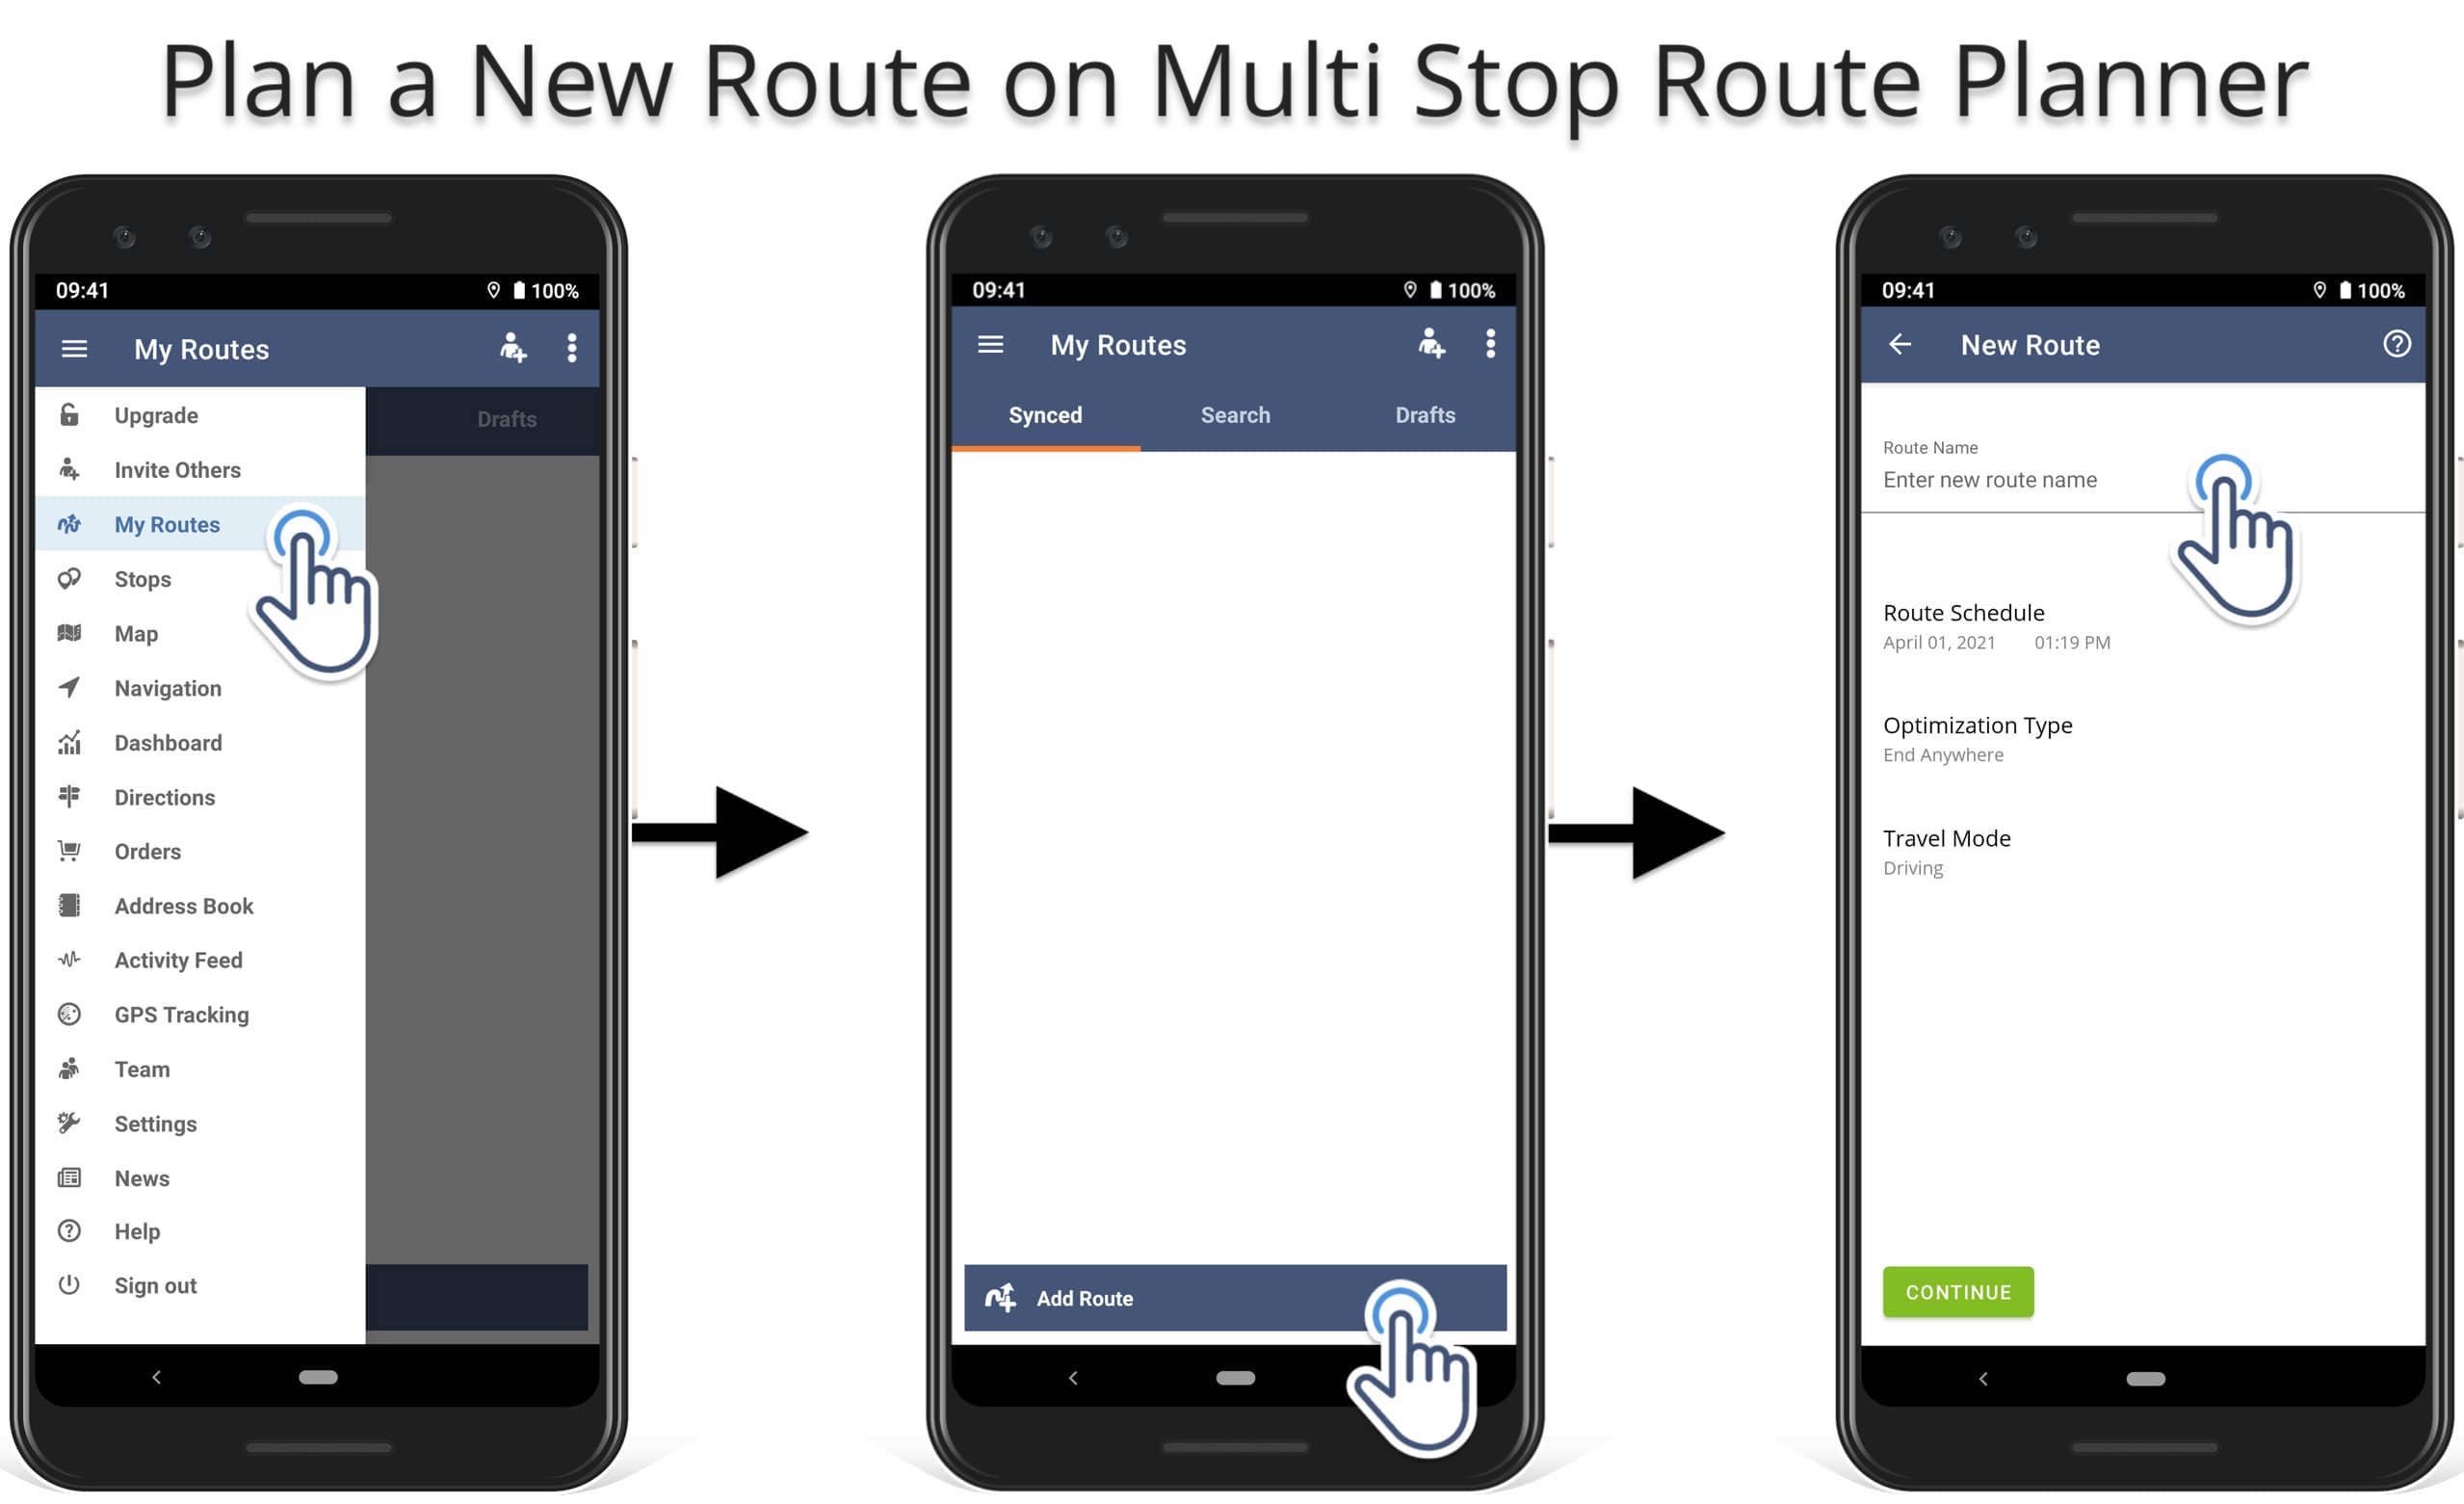 Plan driver routes on mobile Multi Stop Route Planner app for delivery and field service